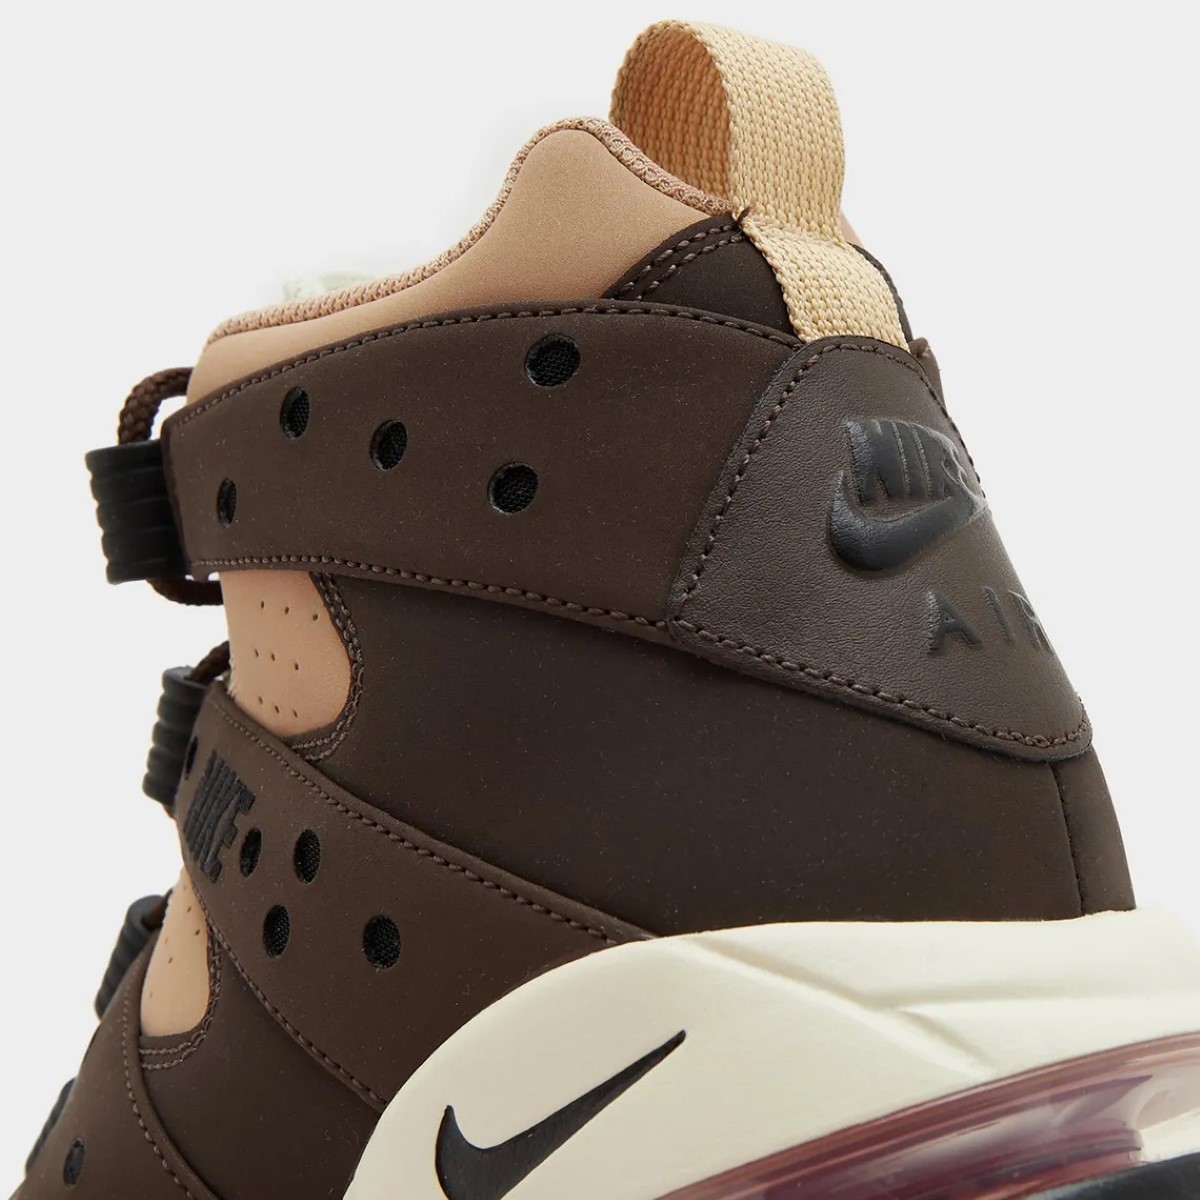 Experiencing the first look of Nike Air Max CB ‘94 ''Mocha''